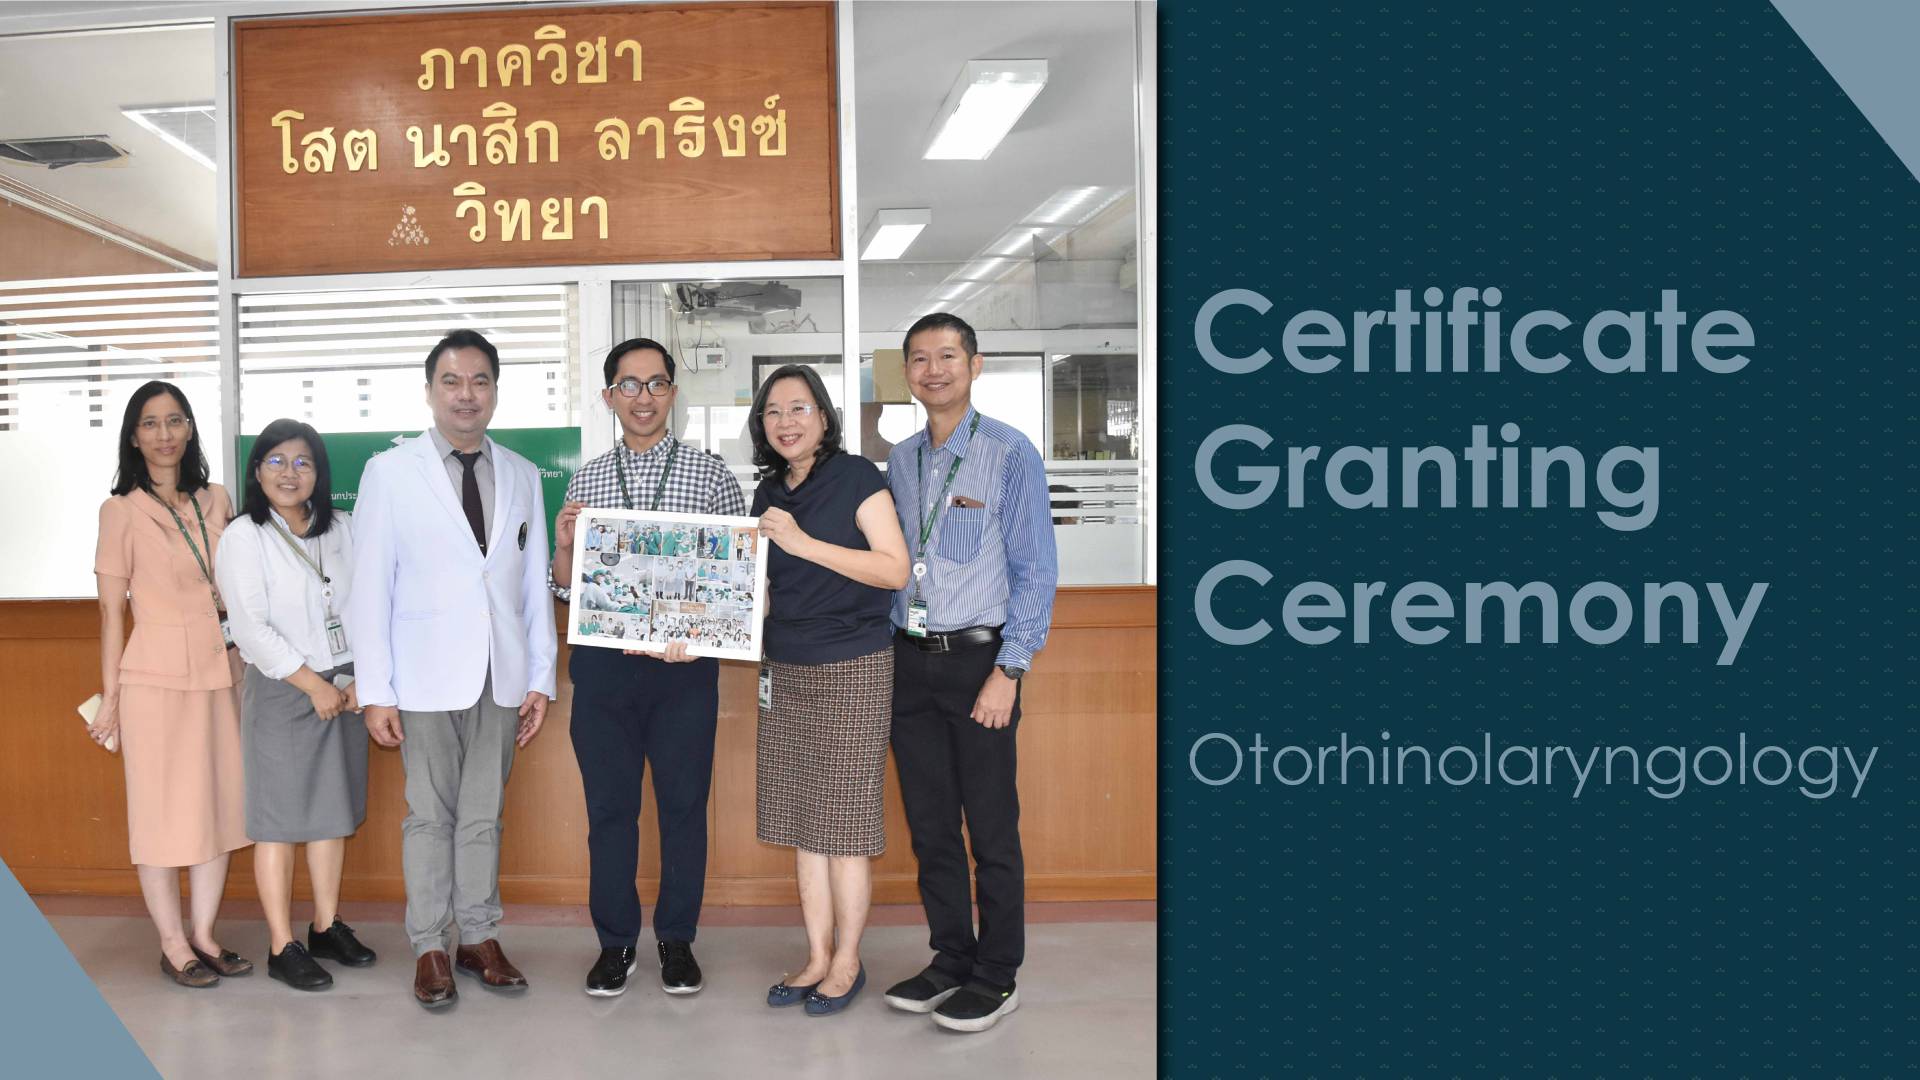 The Certificate Granting Ceremony For Siriraj Scholarship For Doctors From Asean And Developing